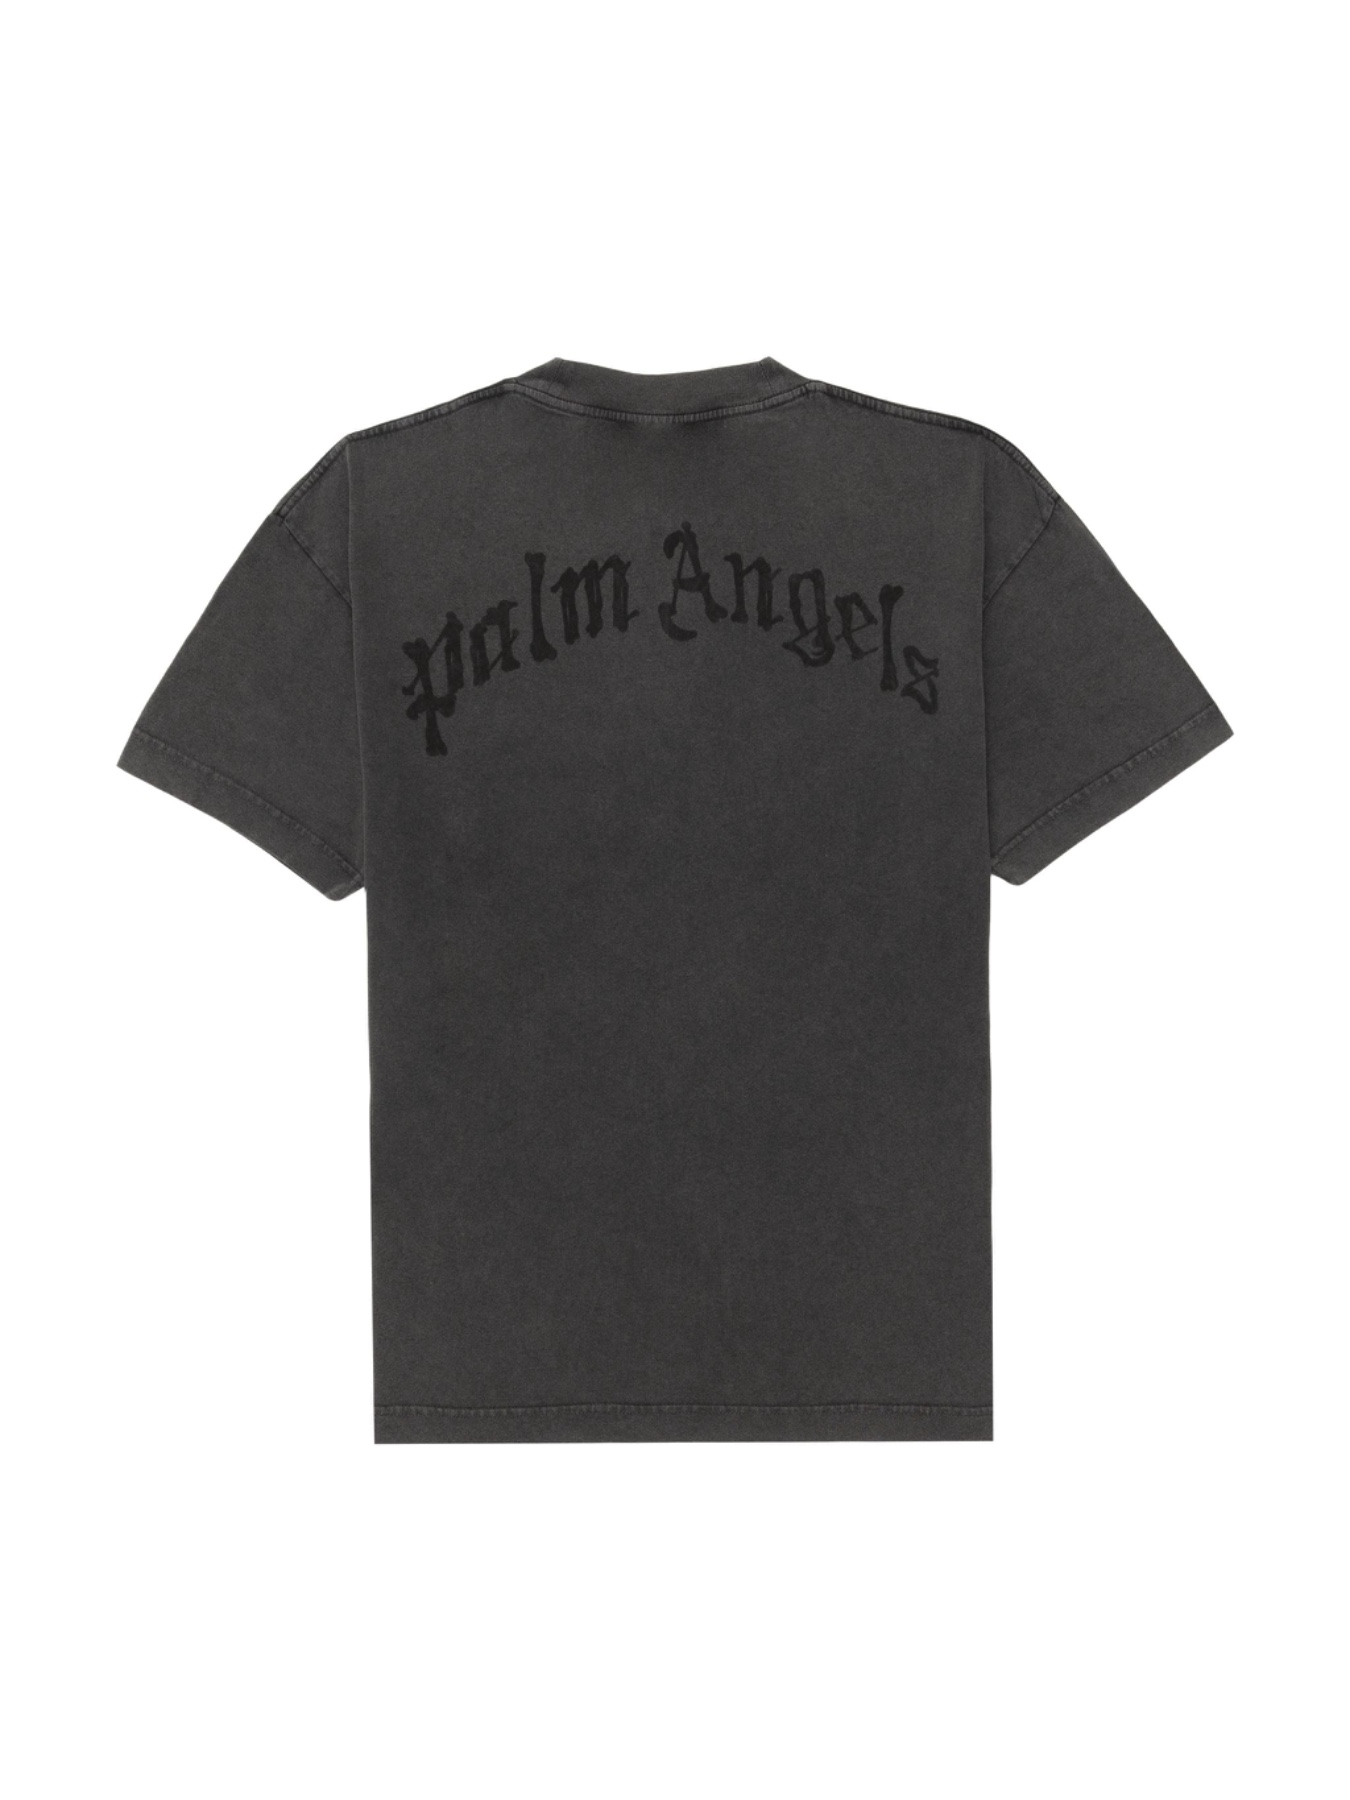 Palm Angels Halloween 2020 Capsule Collection